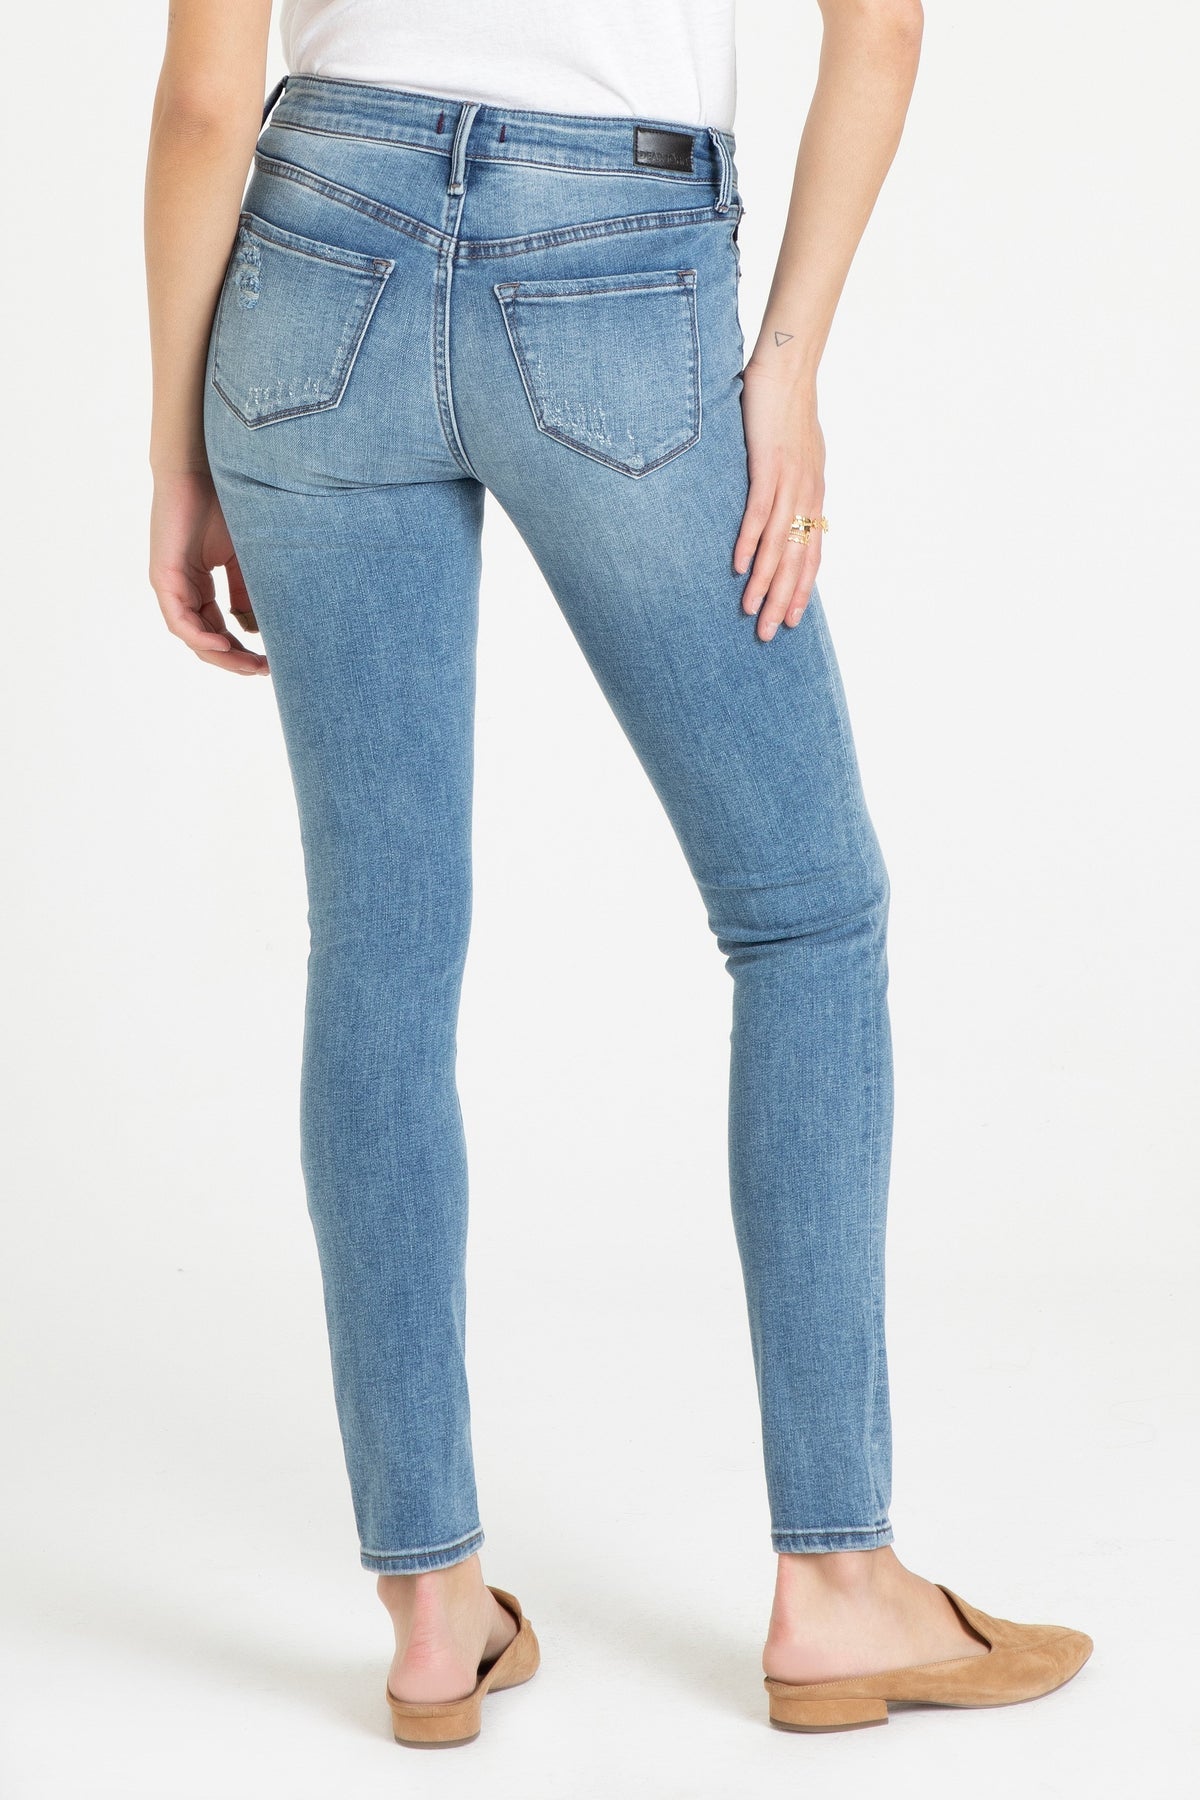 Kyle Mid Rise Skinny Jean in Light Wash